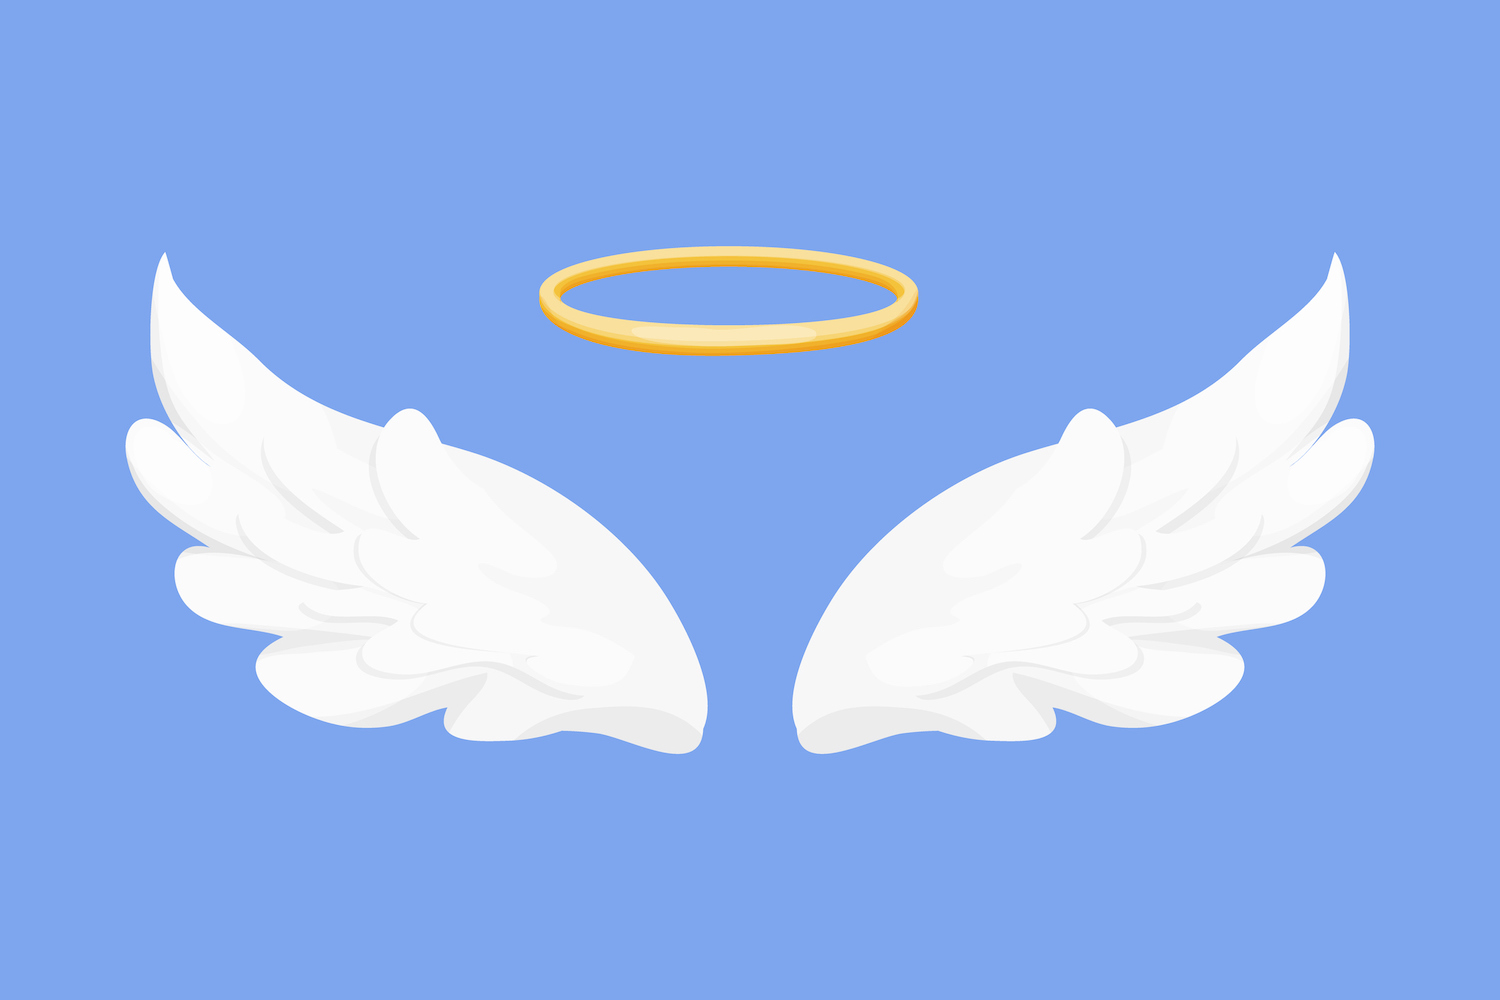 Angel wings with halo. Just starting out angel investing? Avoid these 7 mistakes.